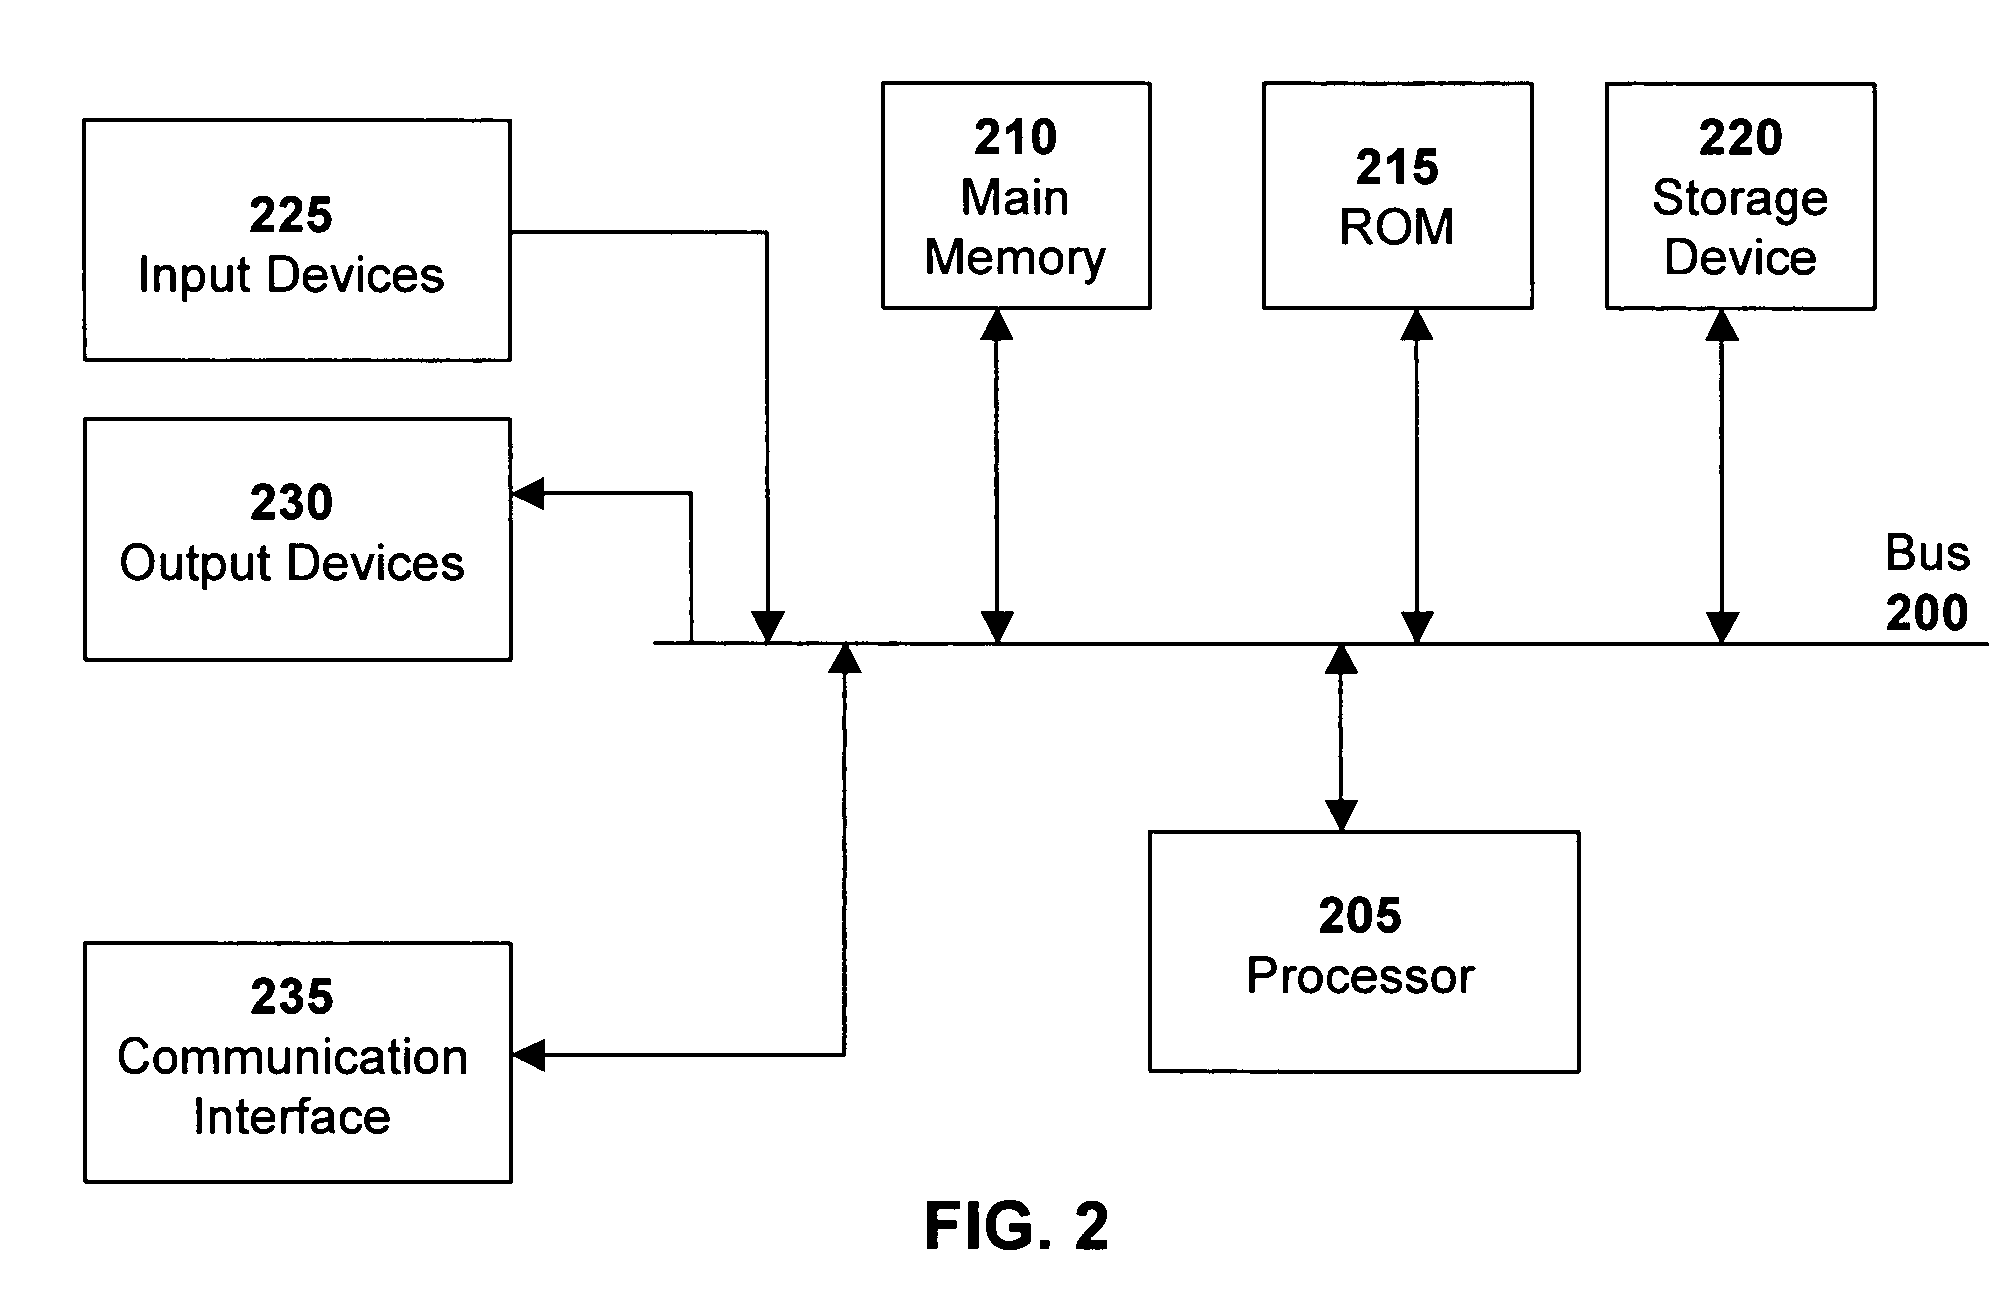 Generating and serving tiles in a digital mapping system